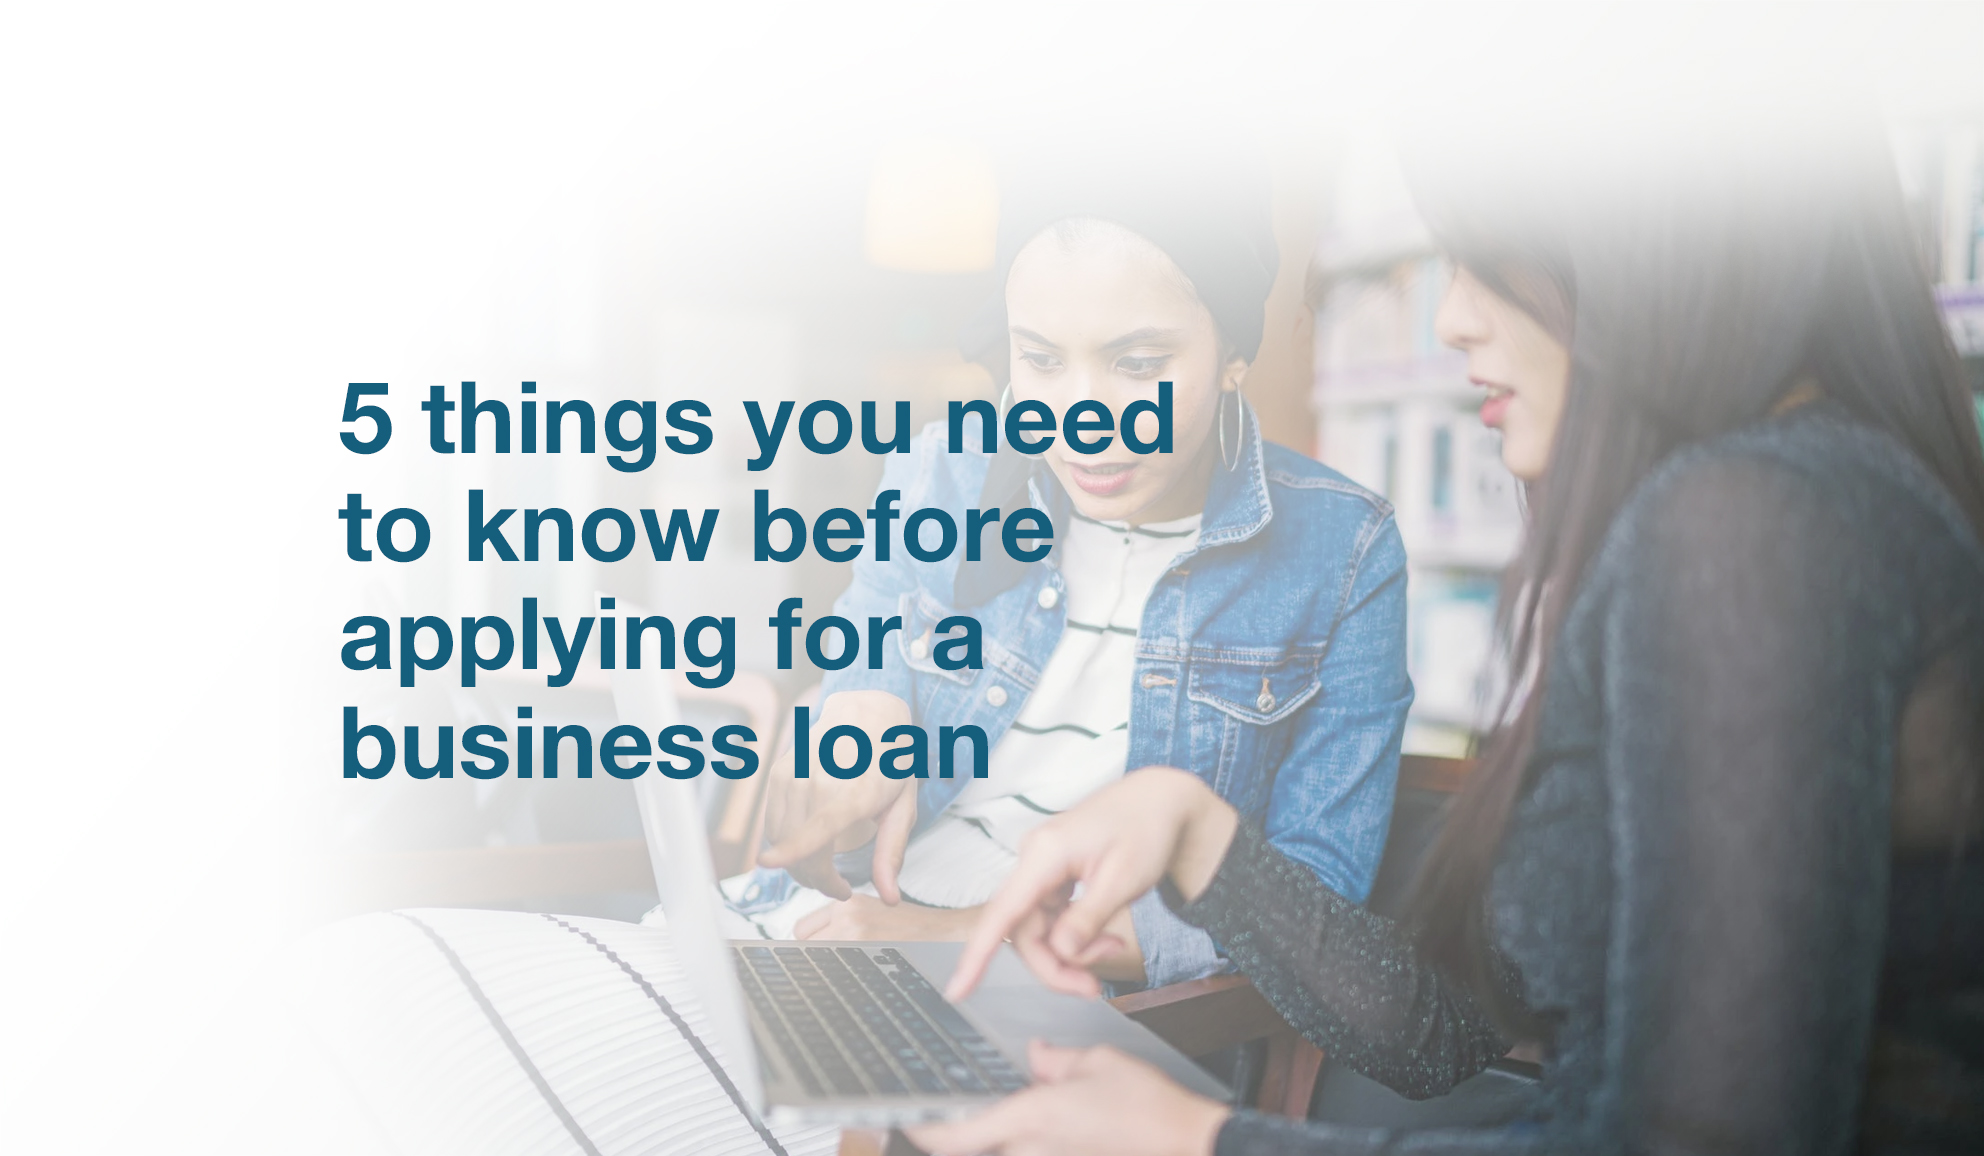 How can I get a business loan in the Philippines